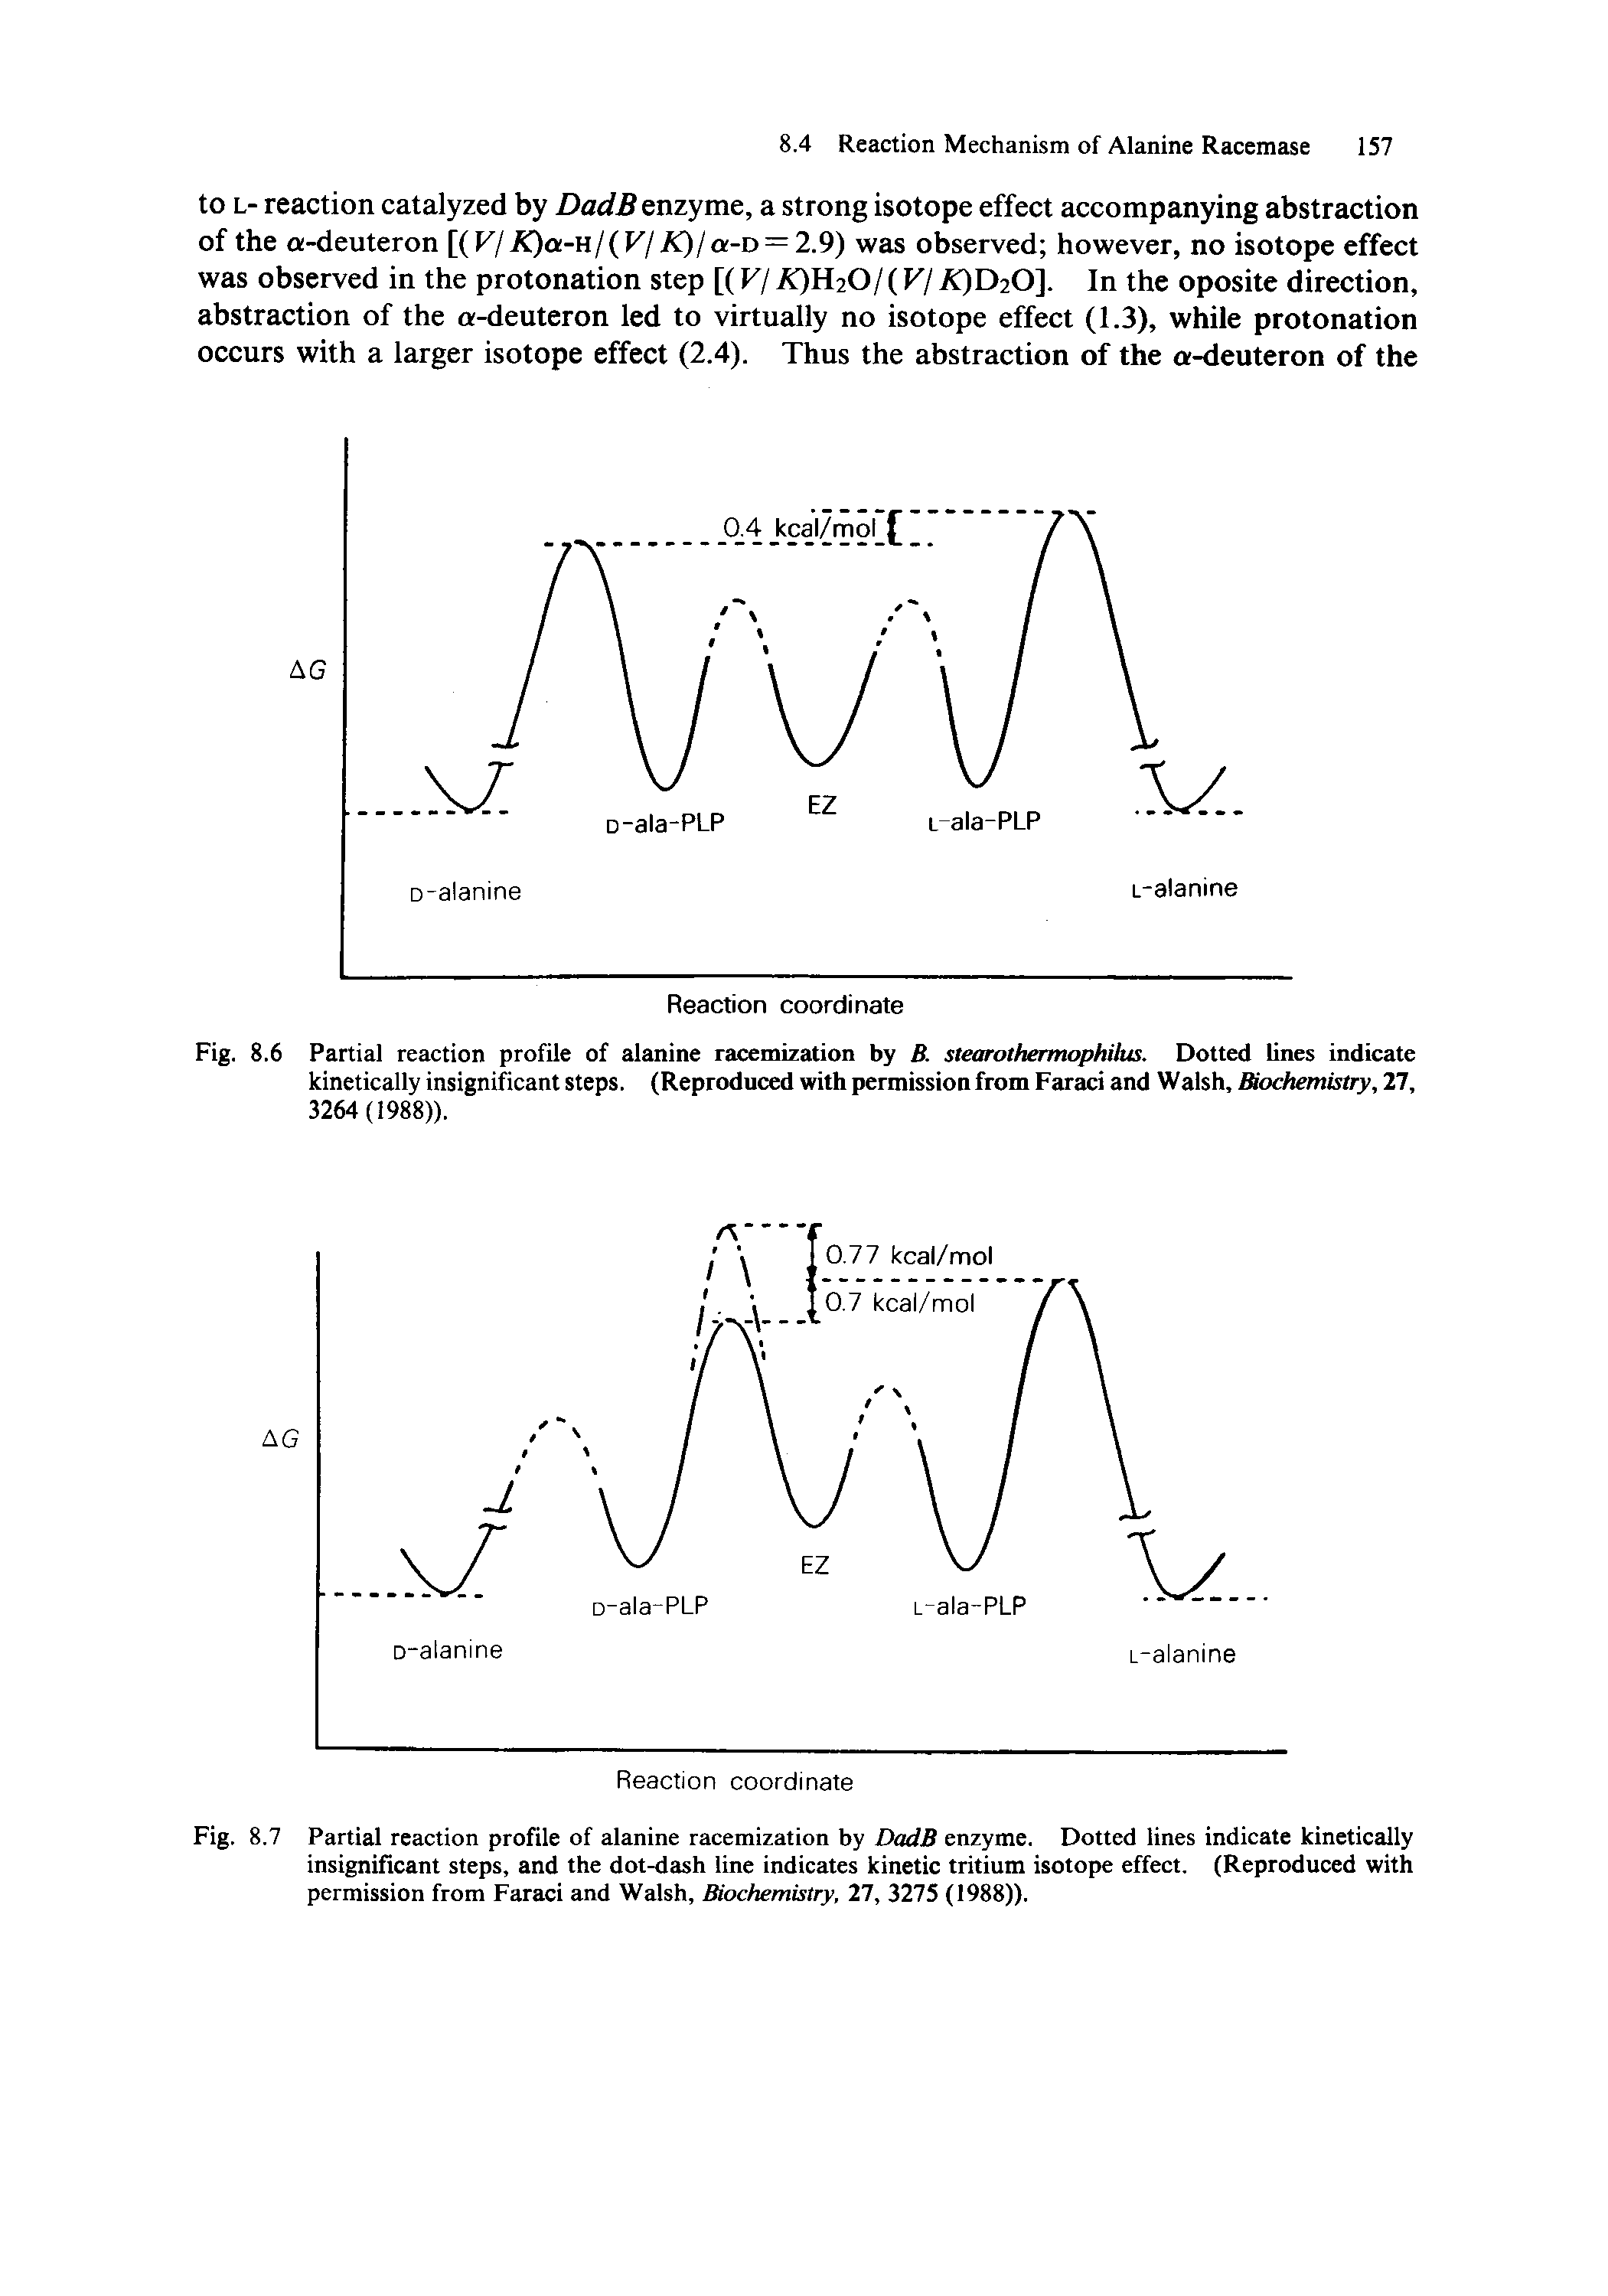 Fig. 8.6 Partial reaction profile of alanine racemization by B. stearothermophilus. Dotted lines indicate kinetically insignificant steps. (Reproduced with permission from Faraci and Walsh, Biochemistry, 27, 3264(1988)).